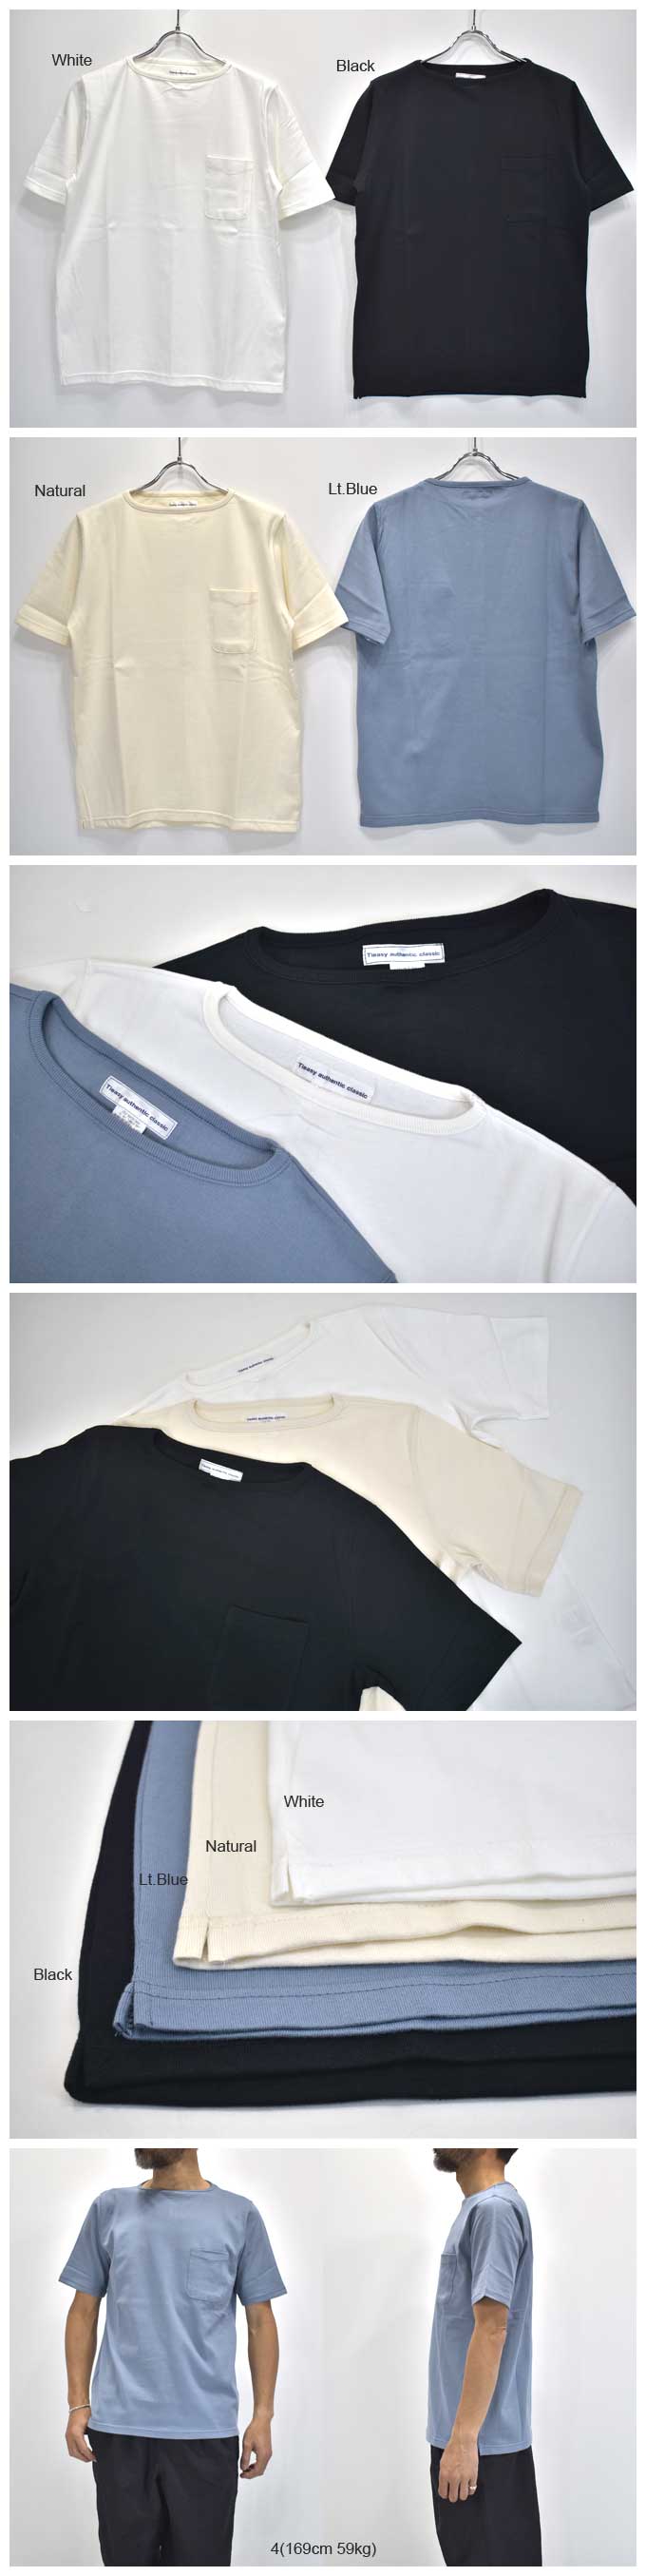 Tieasy Authentic Classic Tieasy Summer Knit Pk T-Shirts